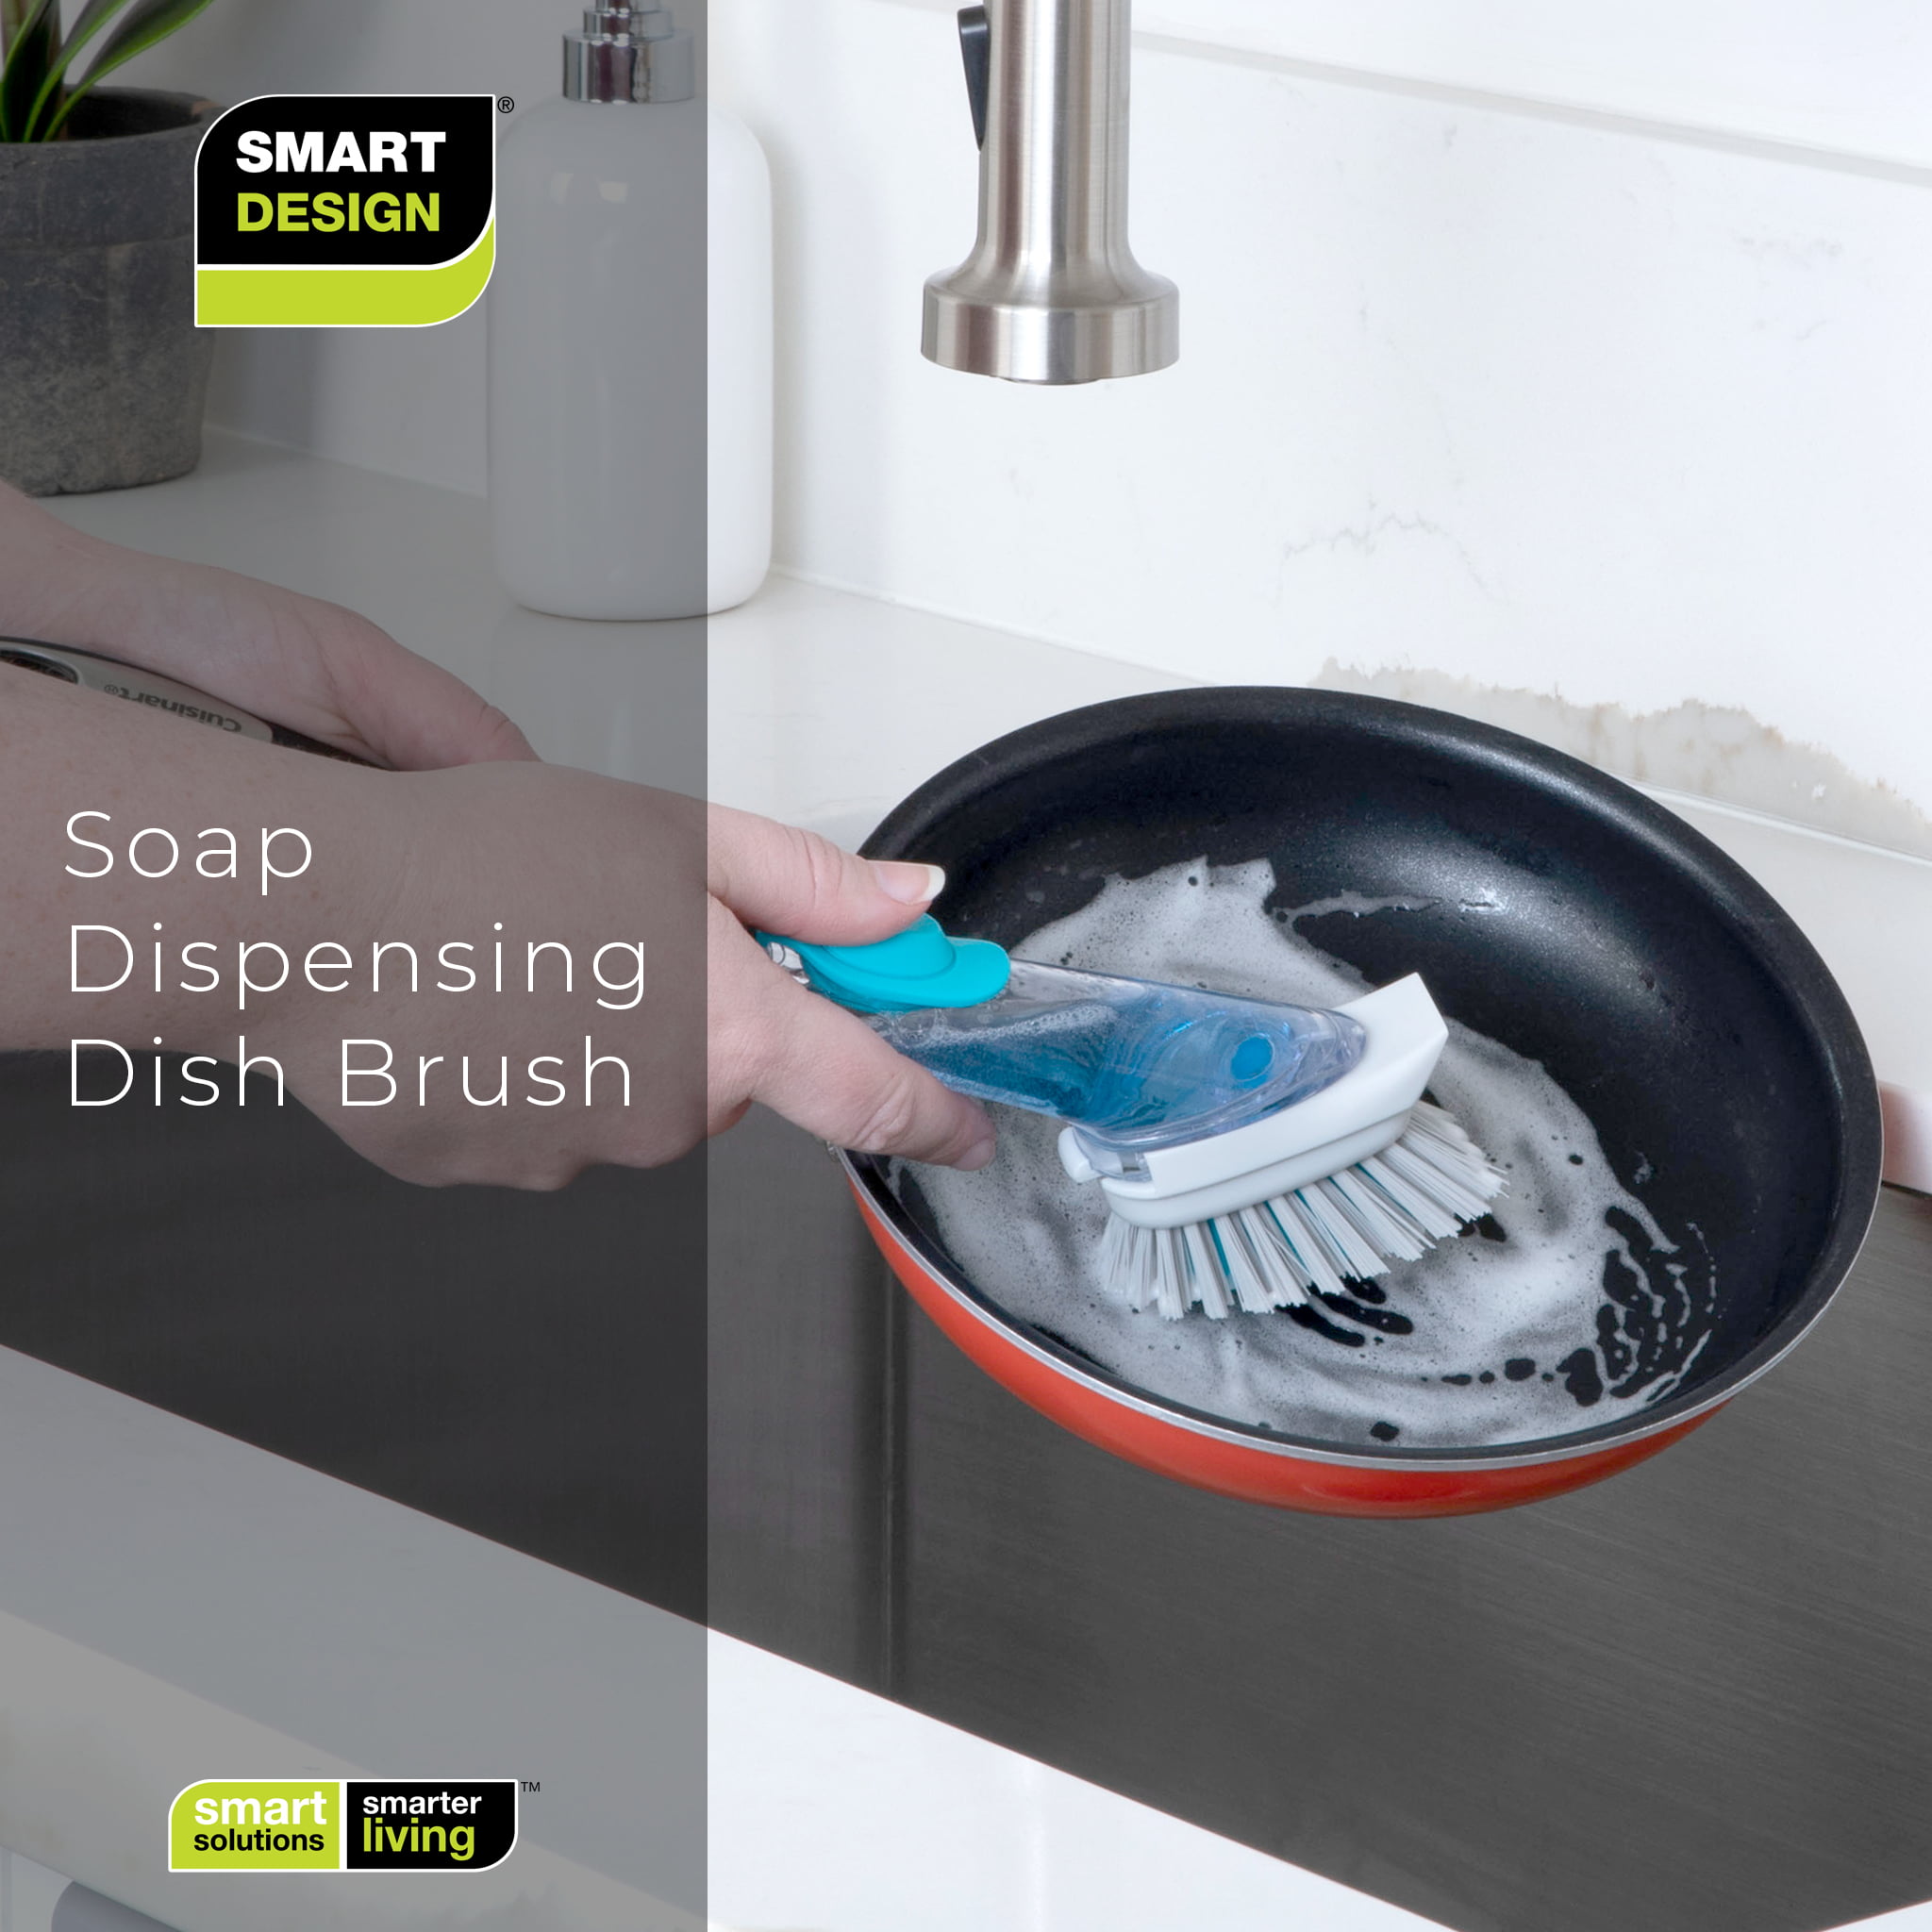 Smart Design Replacement Head for Non Scratch Soap Dispensing Dish Sponge - Set of 2 - Built-in Scraper - Odor Resistant - Dishwasher Safe - Cleaning